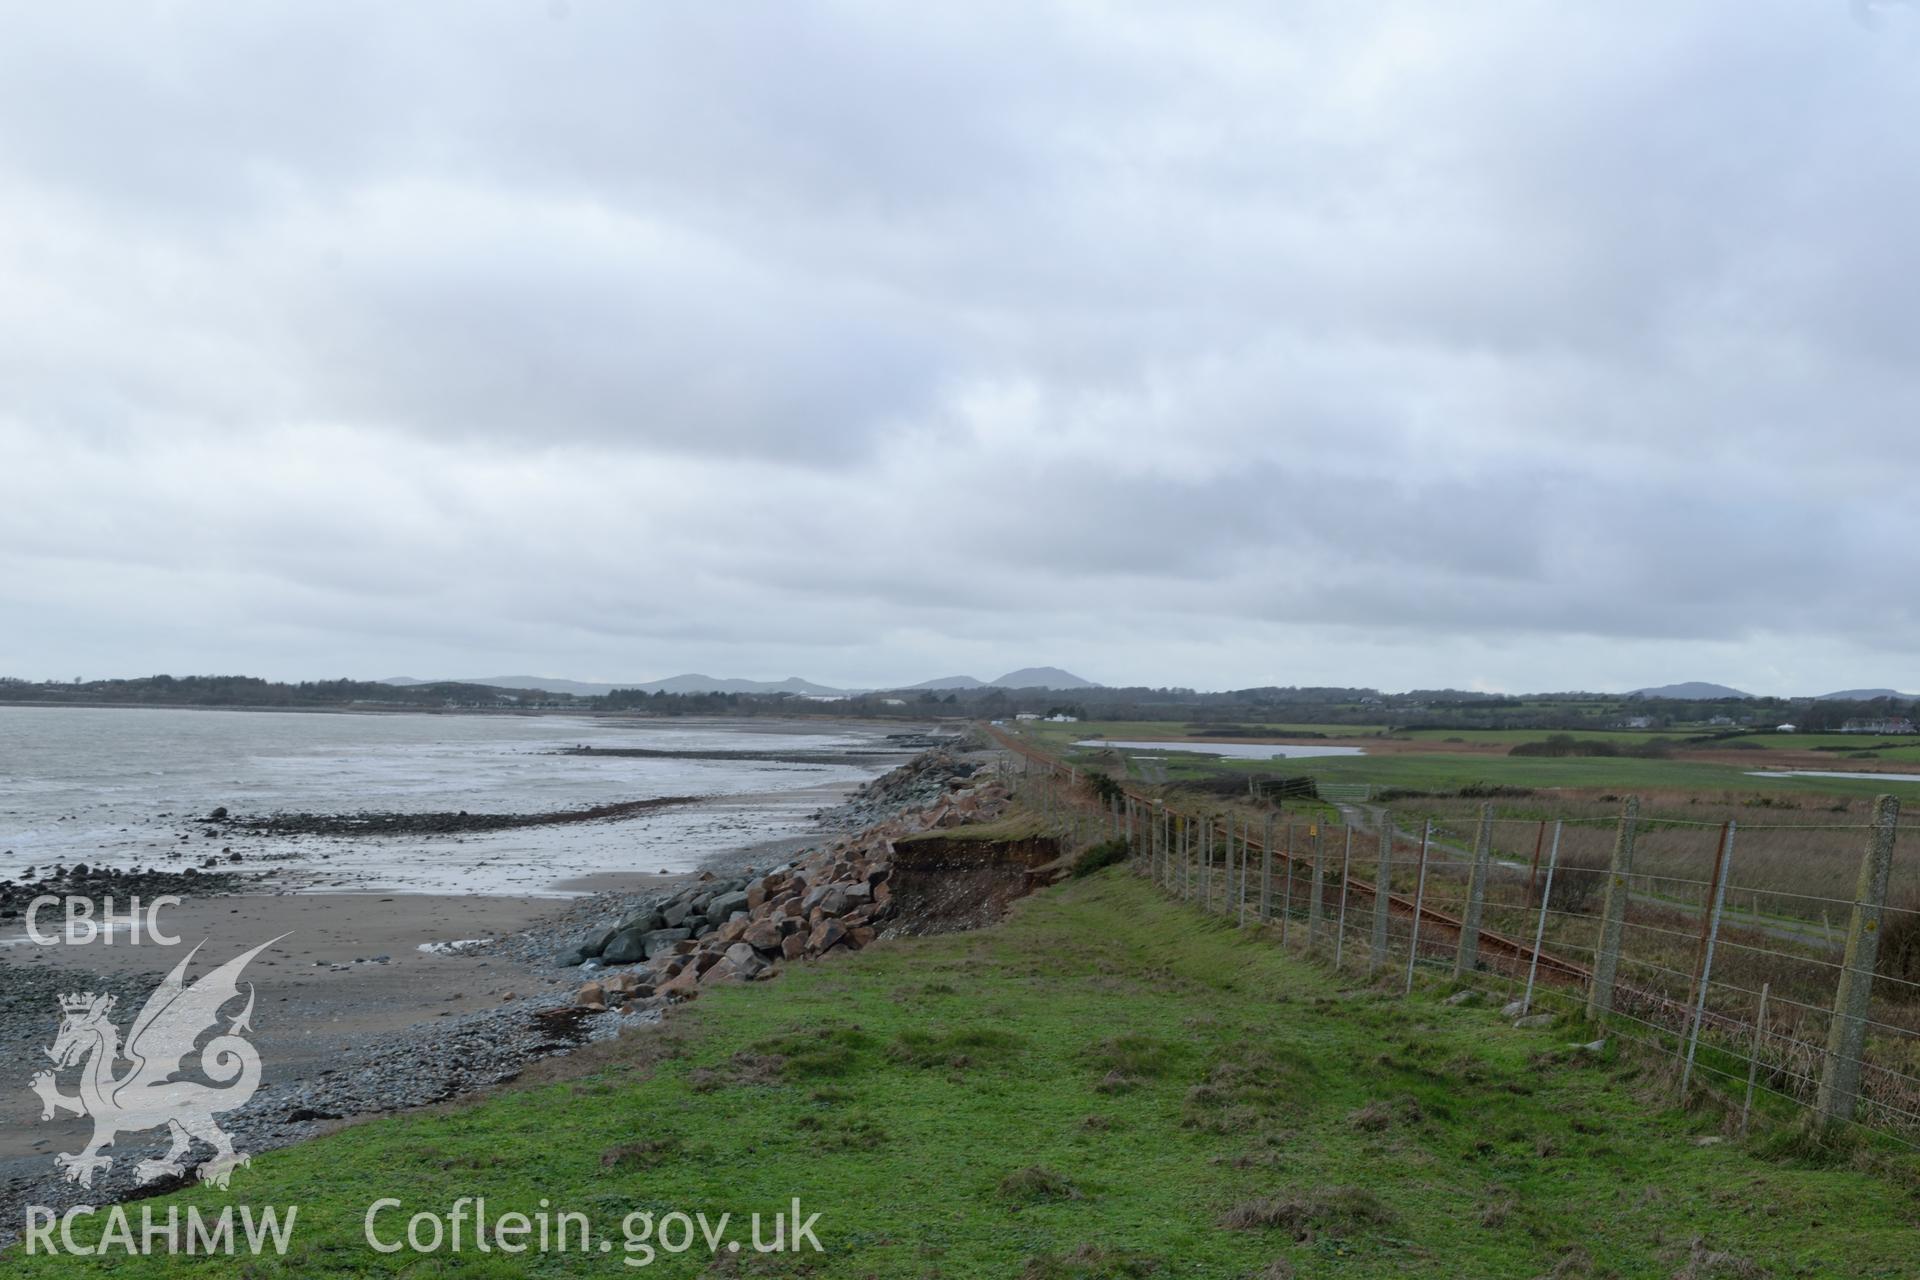 View along coast of Cardigan Bay and railway line near Tomen Fawr, Llanystumdwy. Photographed by Gwynedd Archaeological Trust during impact assessment of the site on 20th December 2018. Project no. G2564.